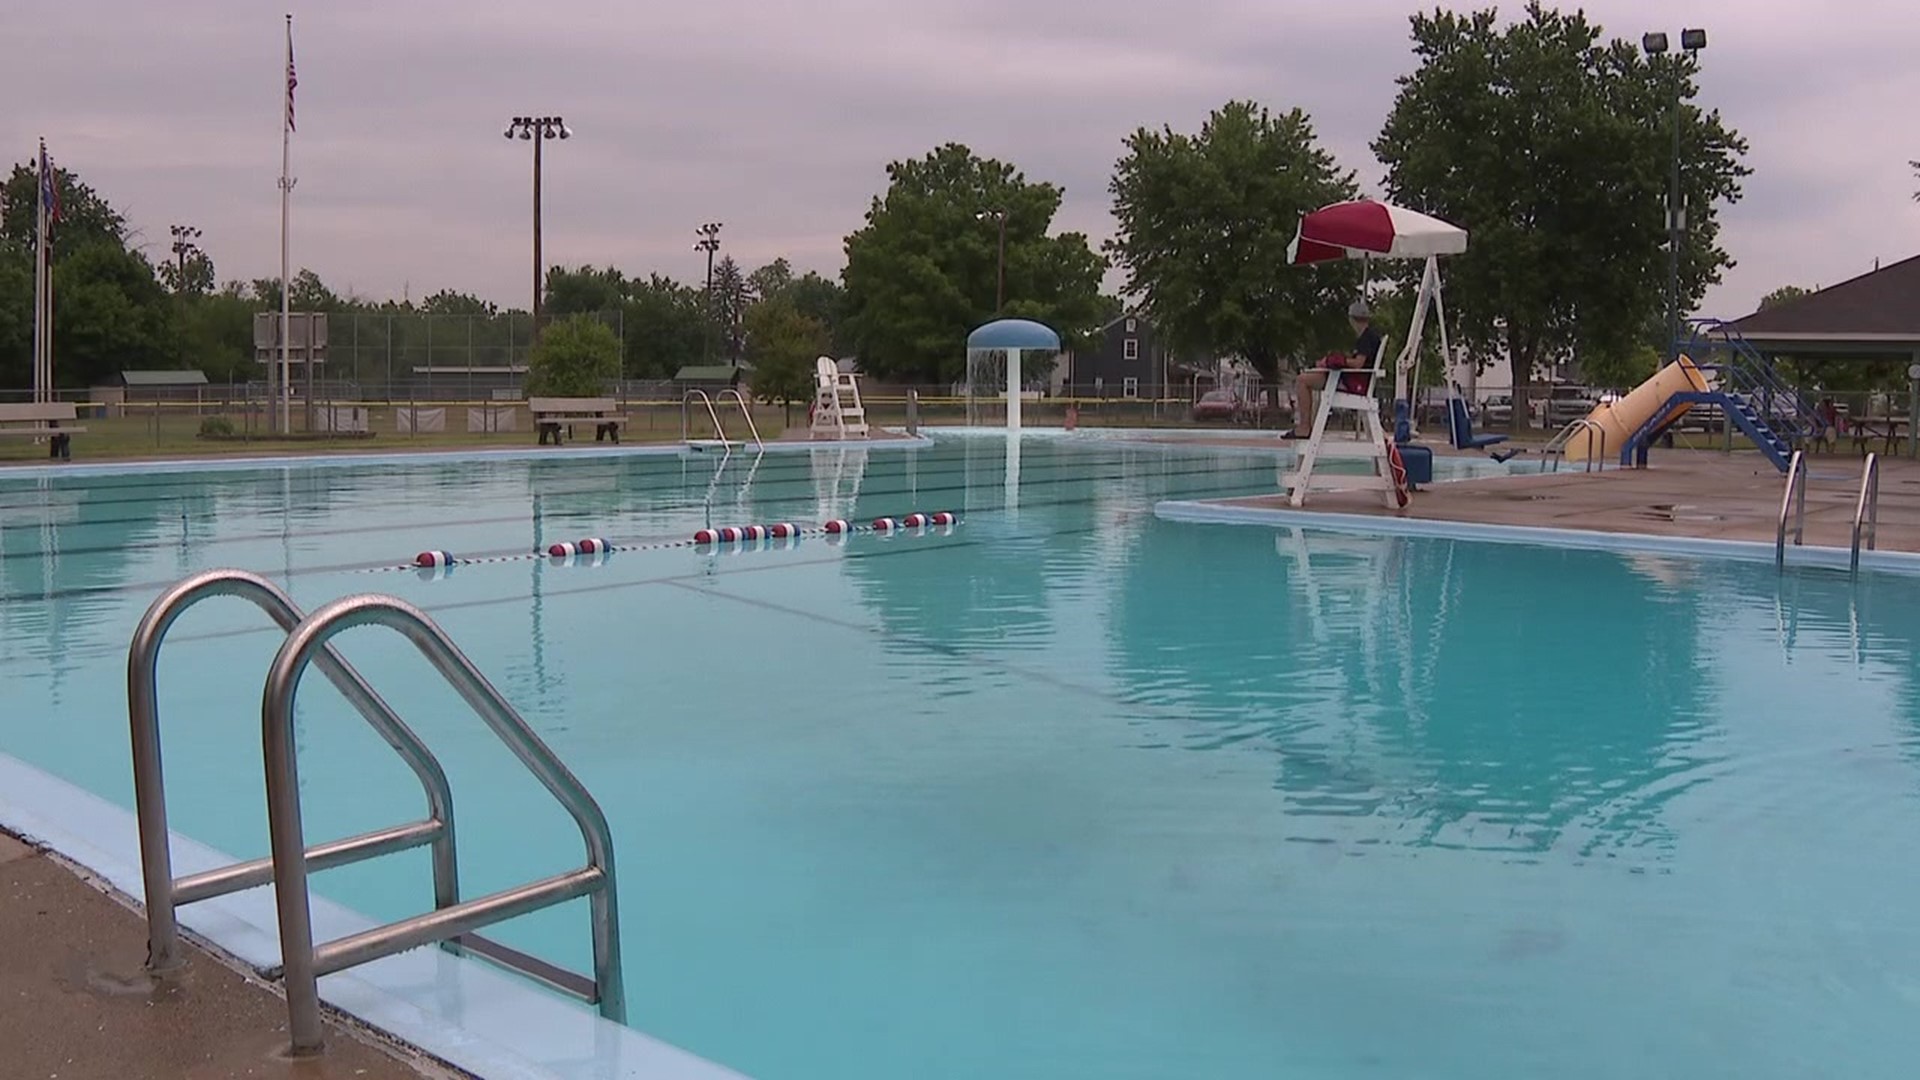 The pool was able to certify all of its lifeguards thanks to a donation from a nonprofit.